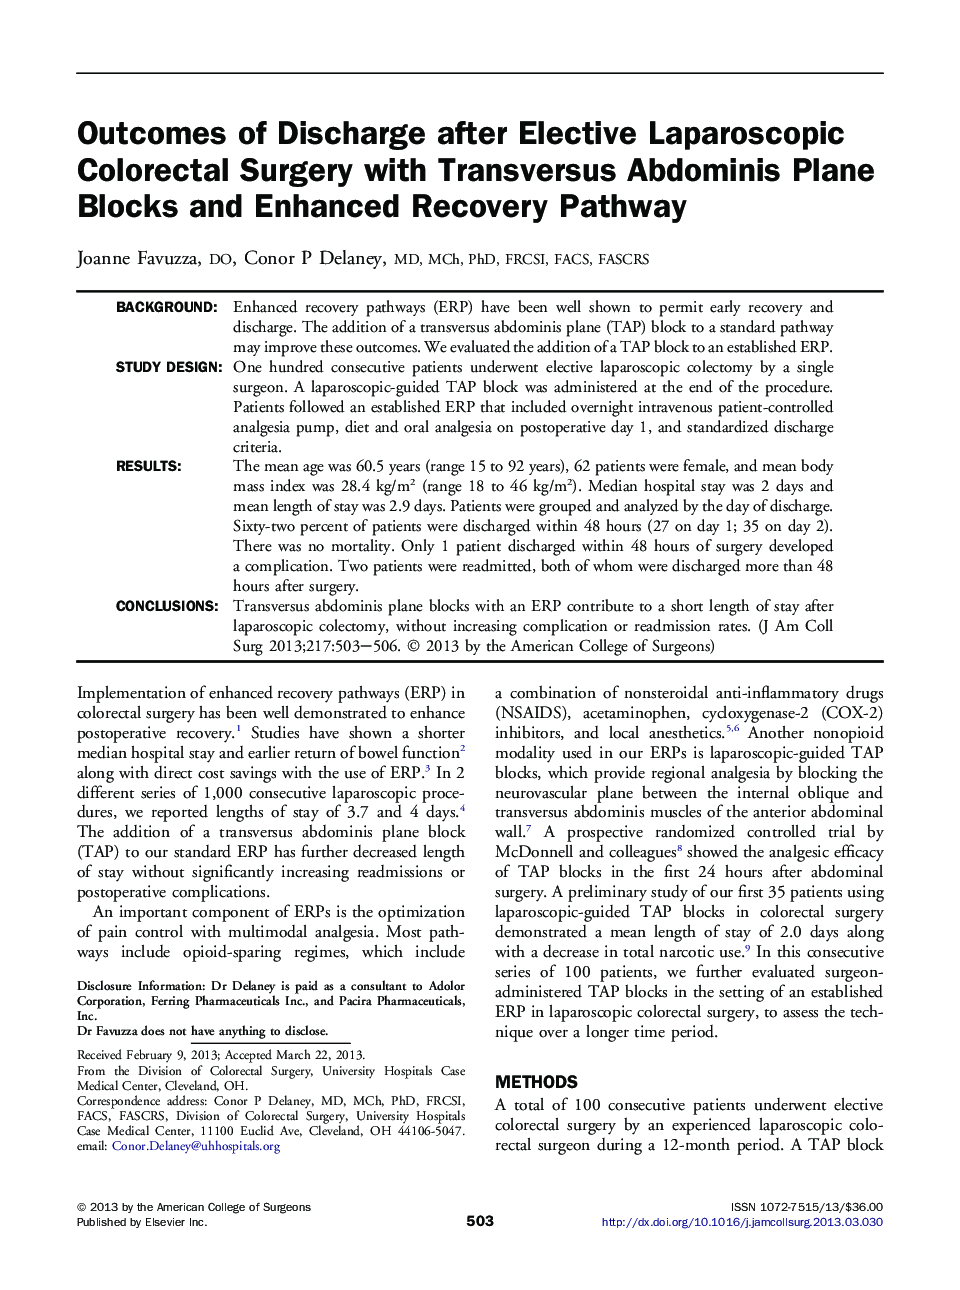 Outcomes of Discharge after Elective Laparoscopic Colorectal Surgery with Transversus Abdominis Plane Blocks and Enhanced Recovery Pathway 